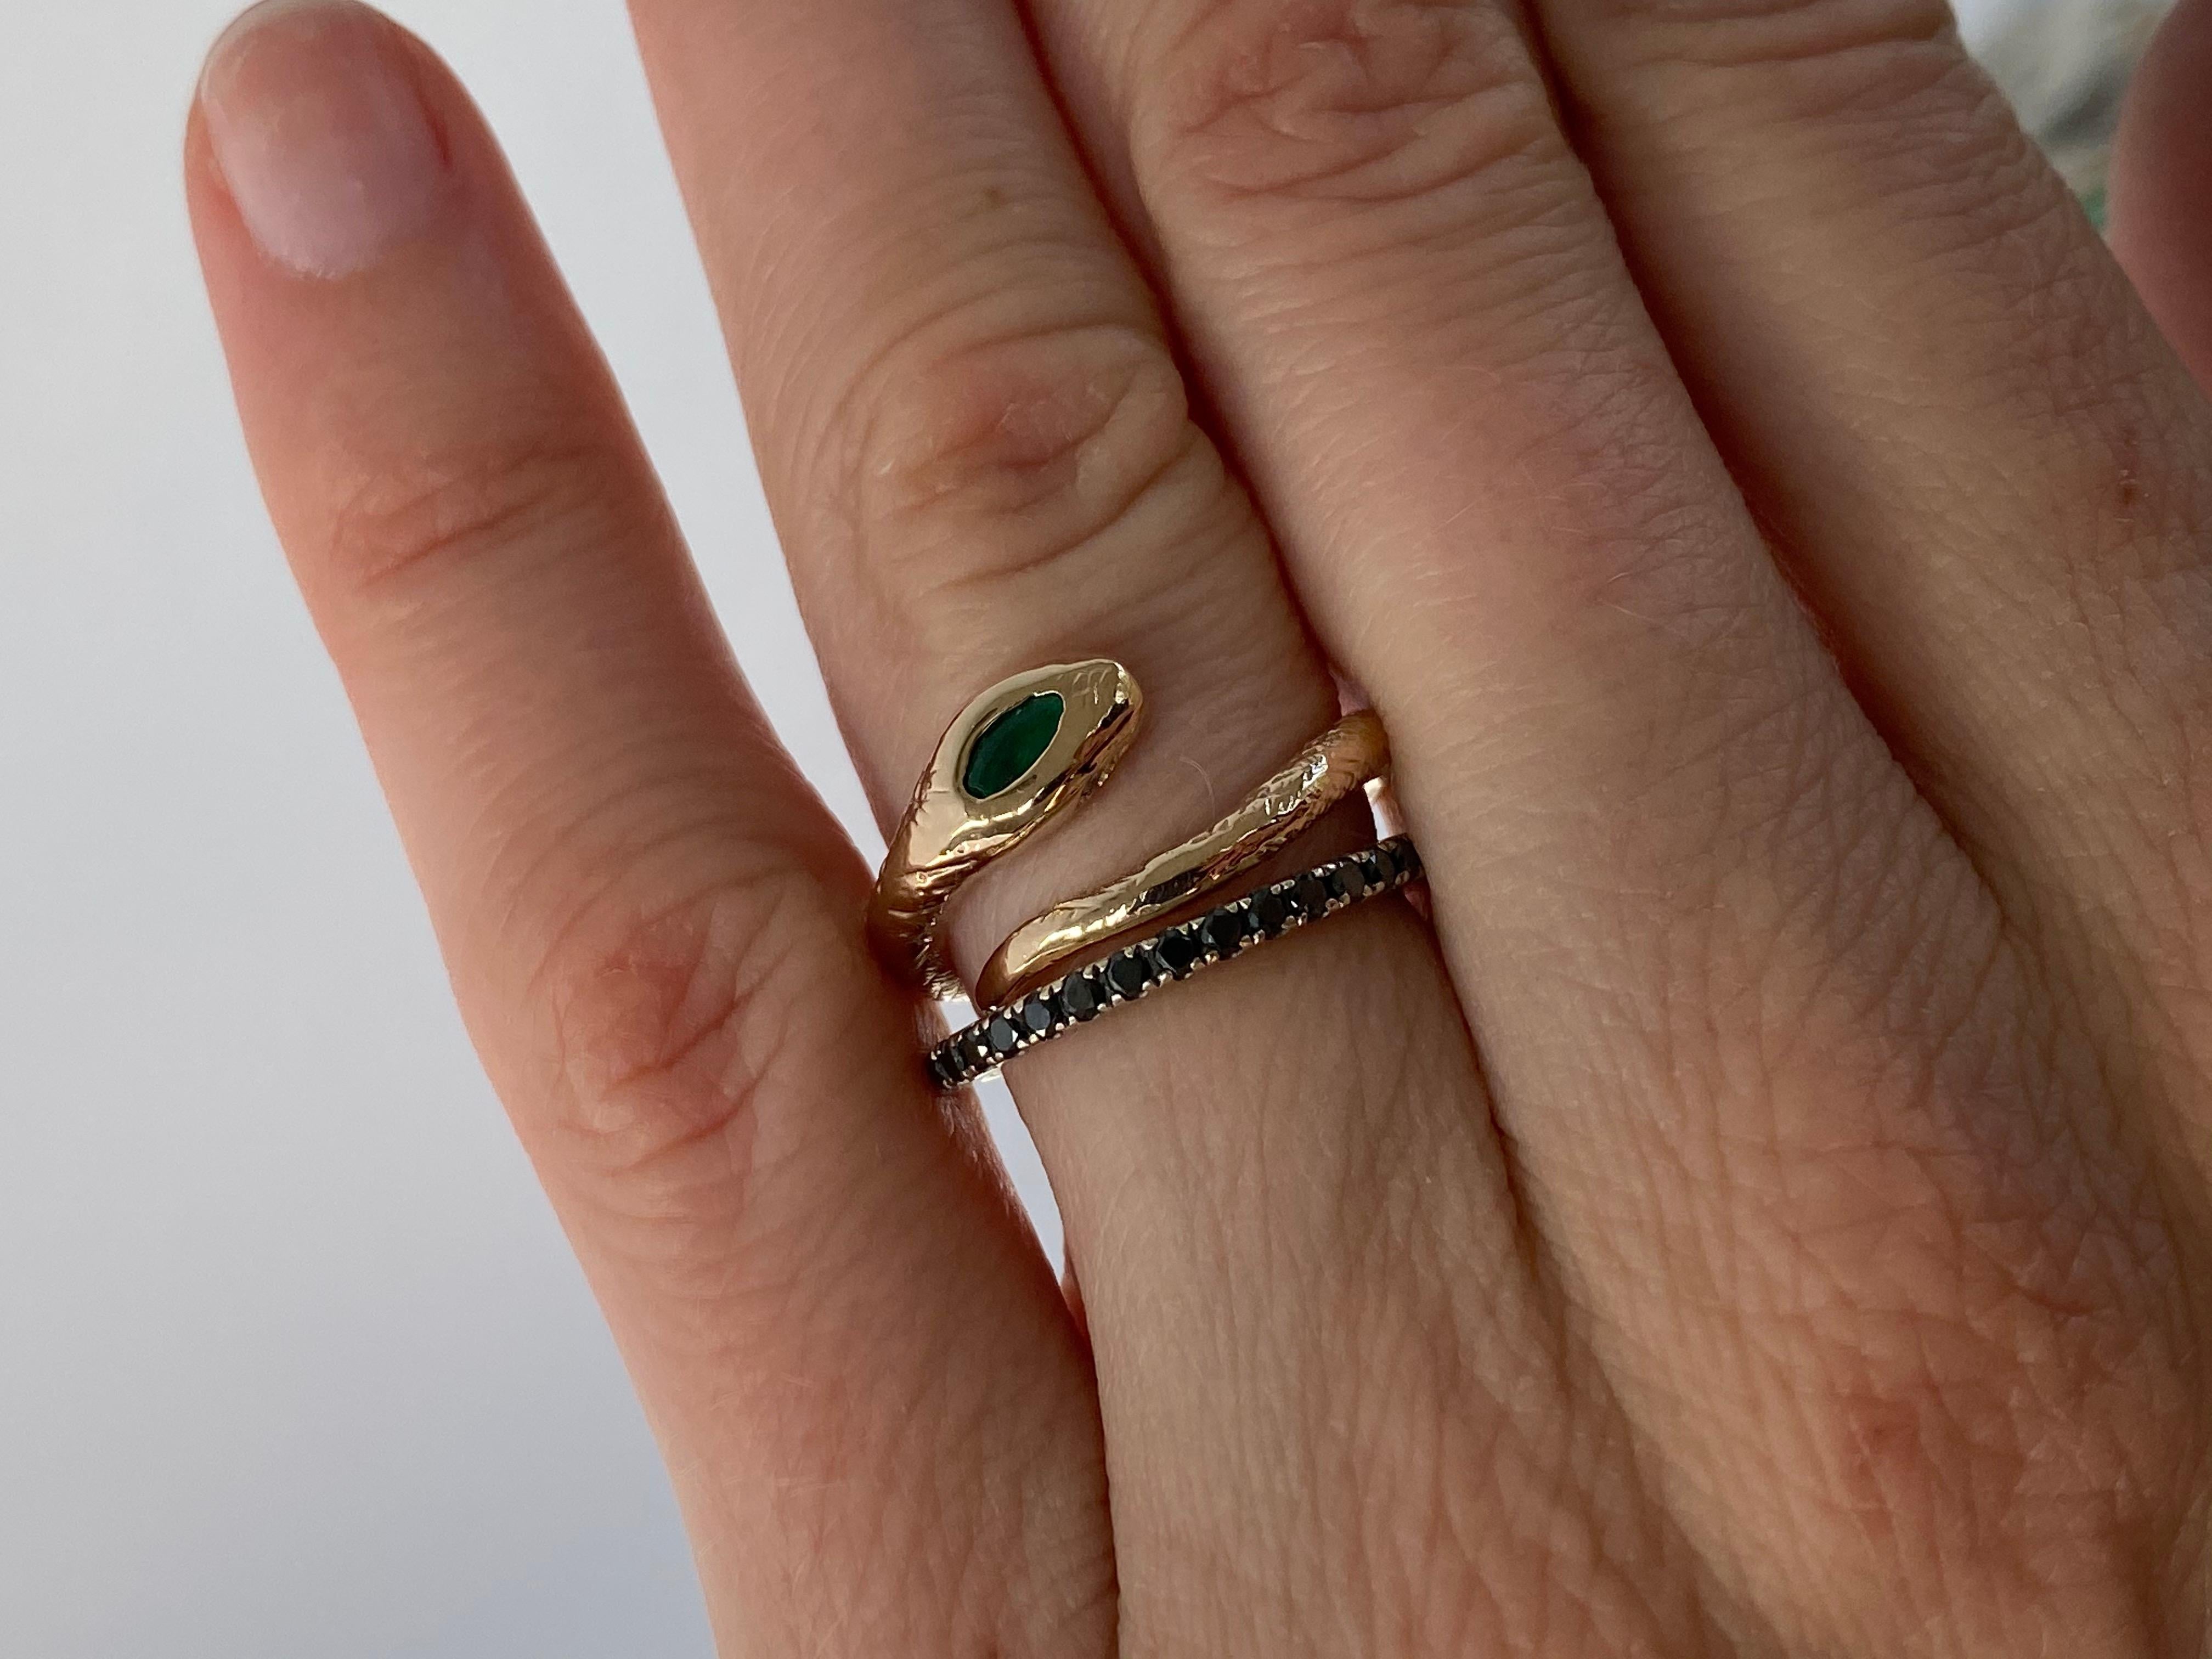 Emerald Snake Ring Gold Ruby Victorian Style Cocktail Adjustable J Dauphin

J DAUPHIN 